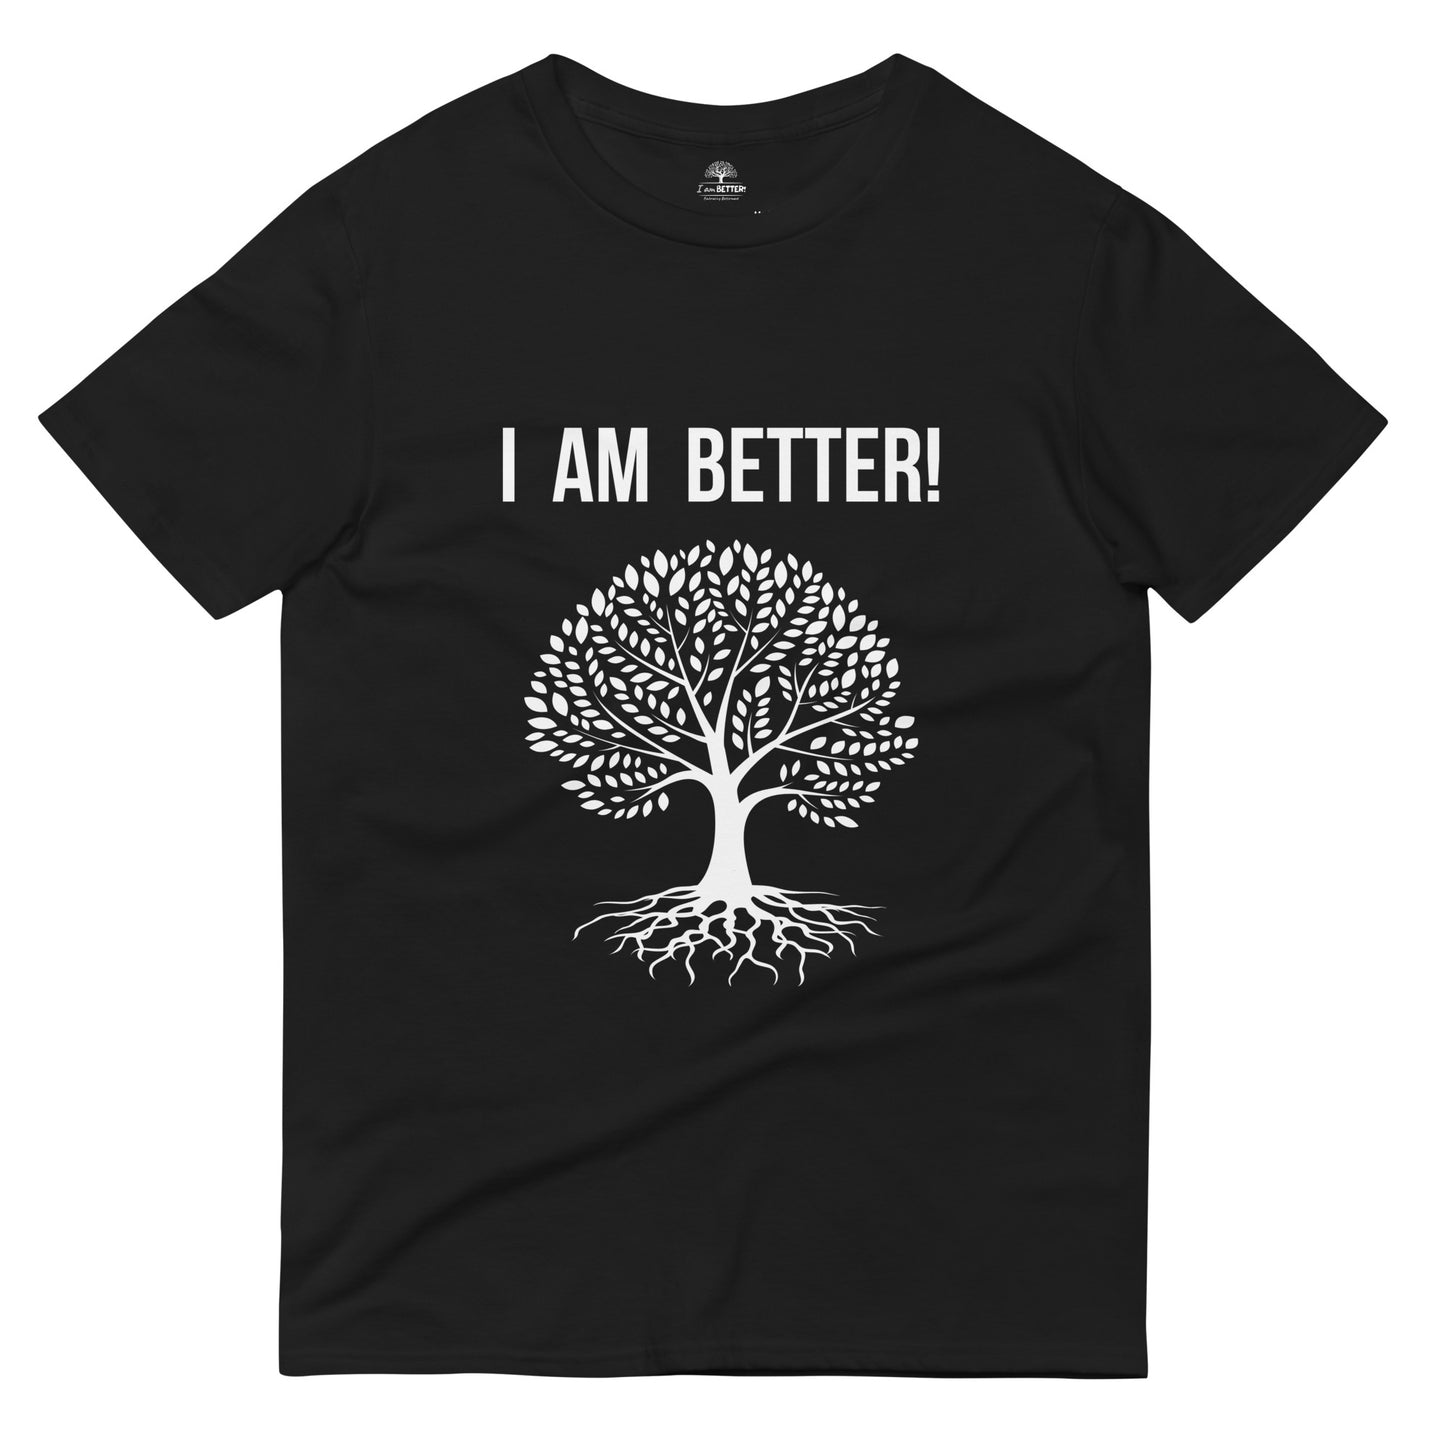 "I AM Better" Tree and Roots Design T-Shirt